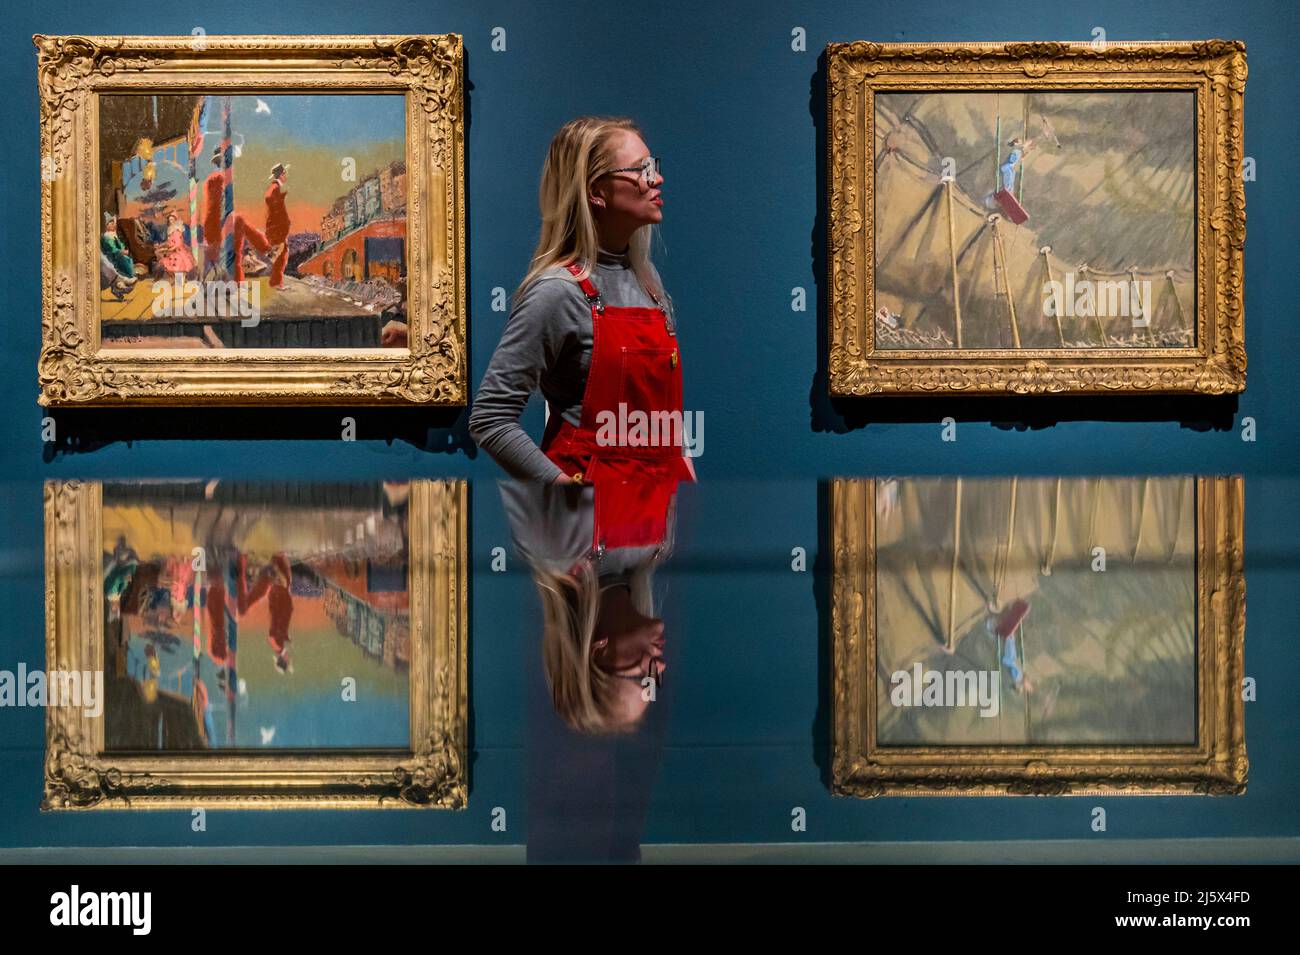 London, UK. 26th Apr, 2022. Brighton Pierots, 1915, and Trapeze - Tate Britain unveils London's biggest retrospective of Walter Sickert (1860-1942) in almost 30 years. A master of self-invention and theatricality, Sickert took a radically modern approach to painting in the late 19th and early 20th centuries, transforming how everyday life was captured on canvas. The exhibition features over 150 of his works from over 70 public and private collections spanning his six-decade career. Credit: Guy Bell/Alamy Live News Stock Photo